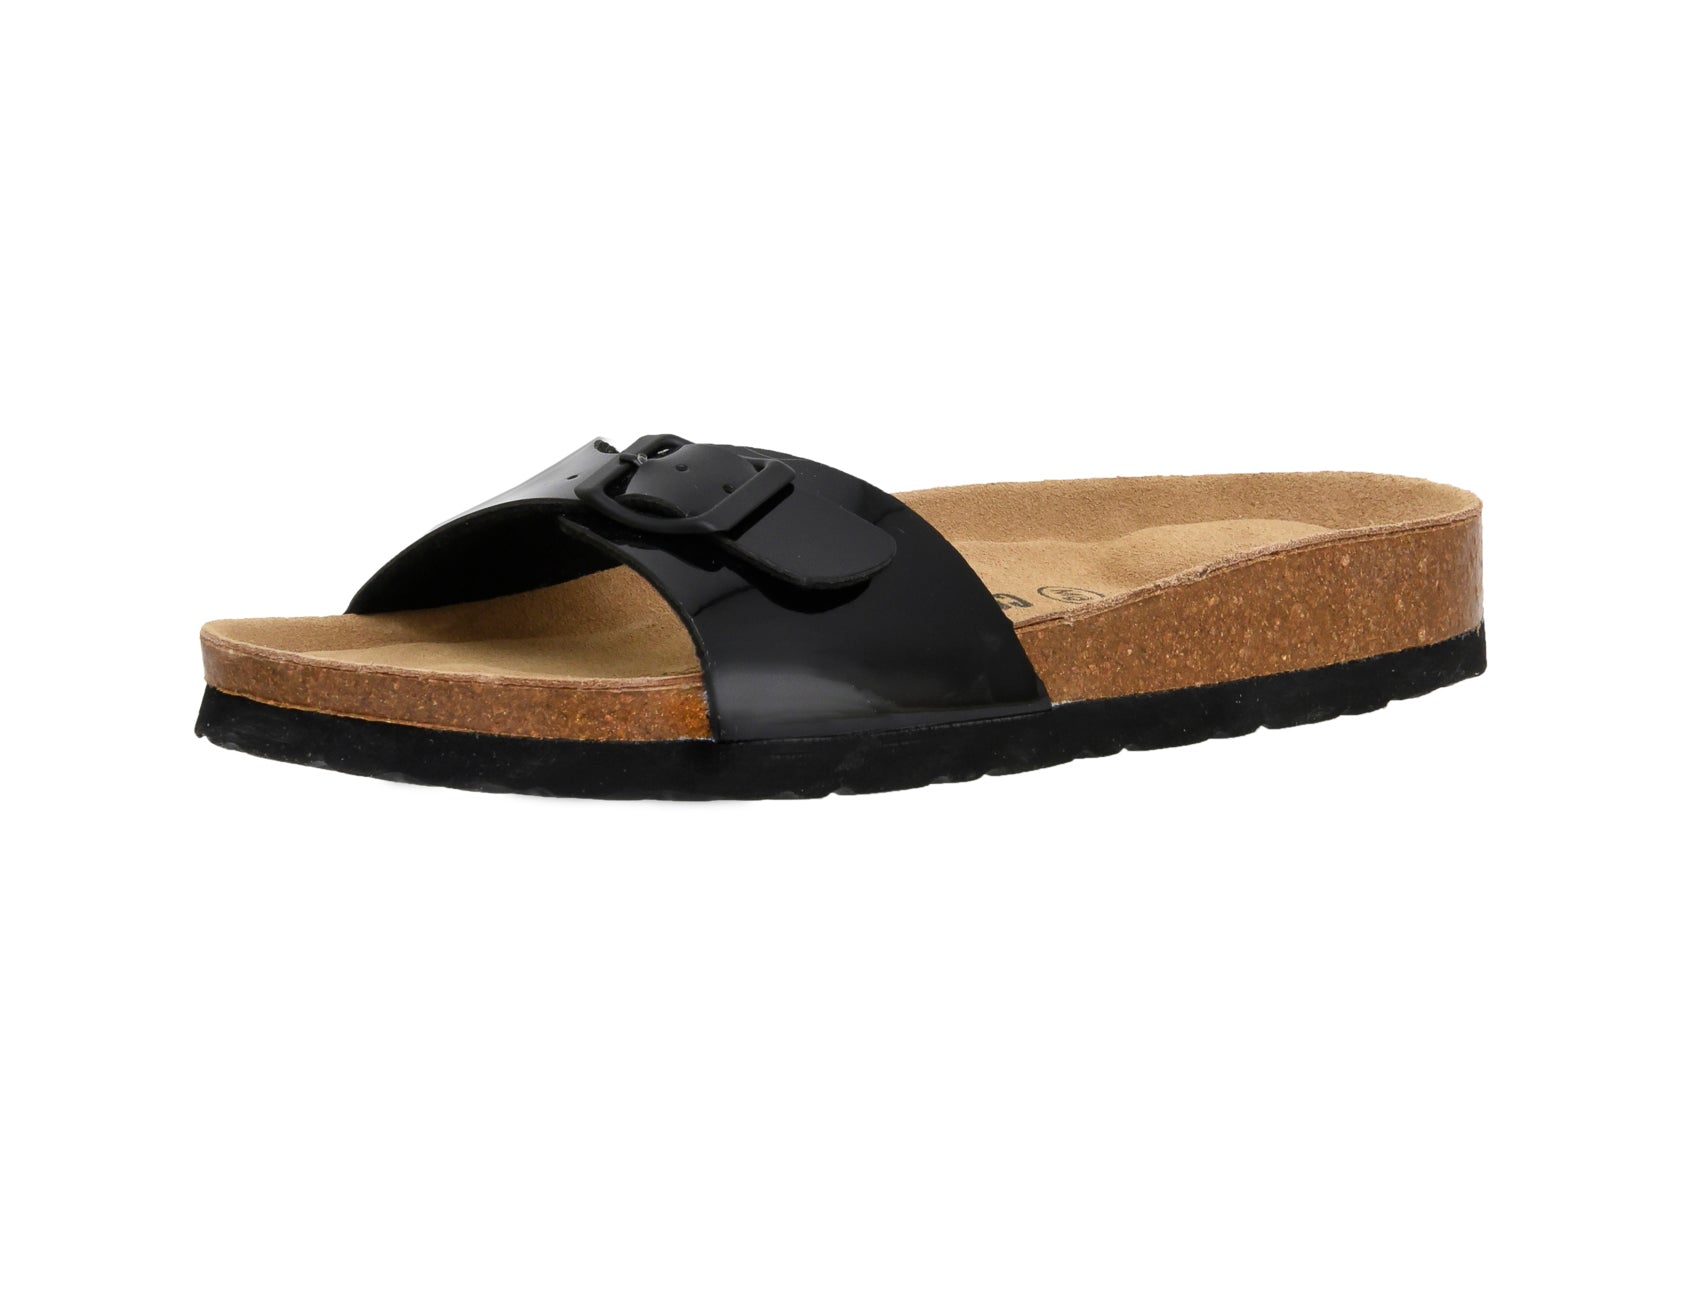 Luca One Band Cork Footbed Sandal Patents